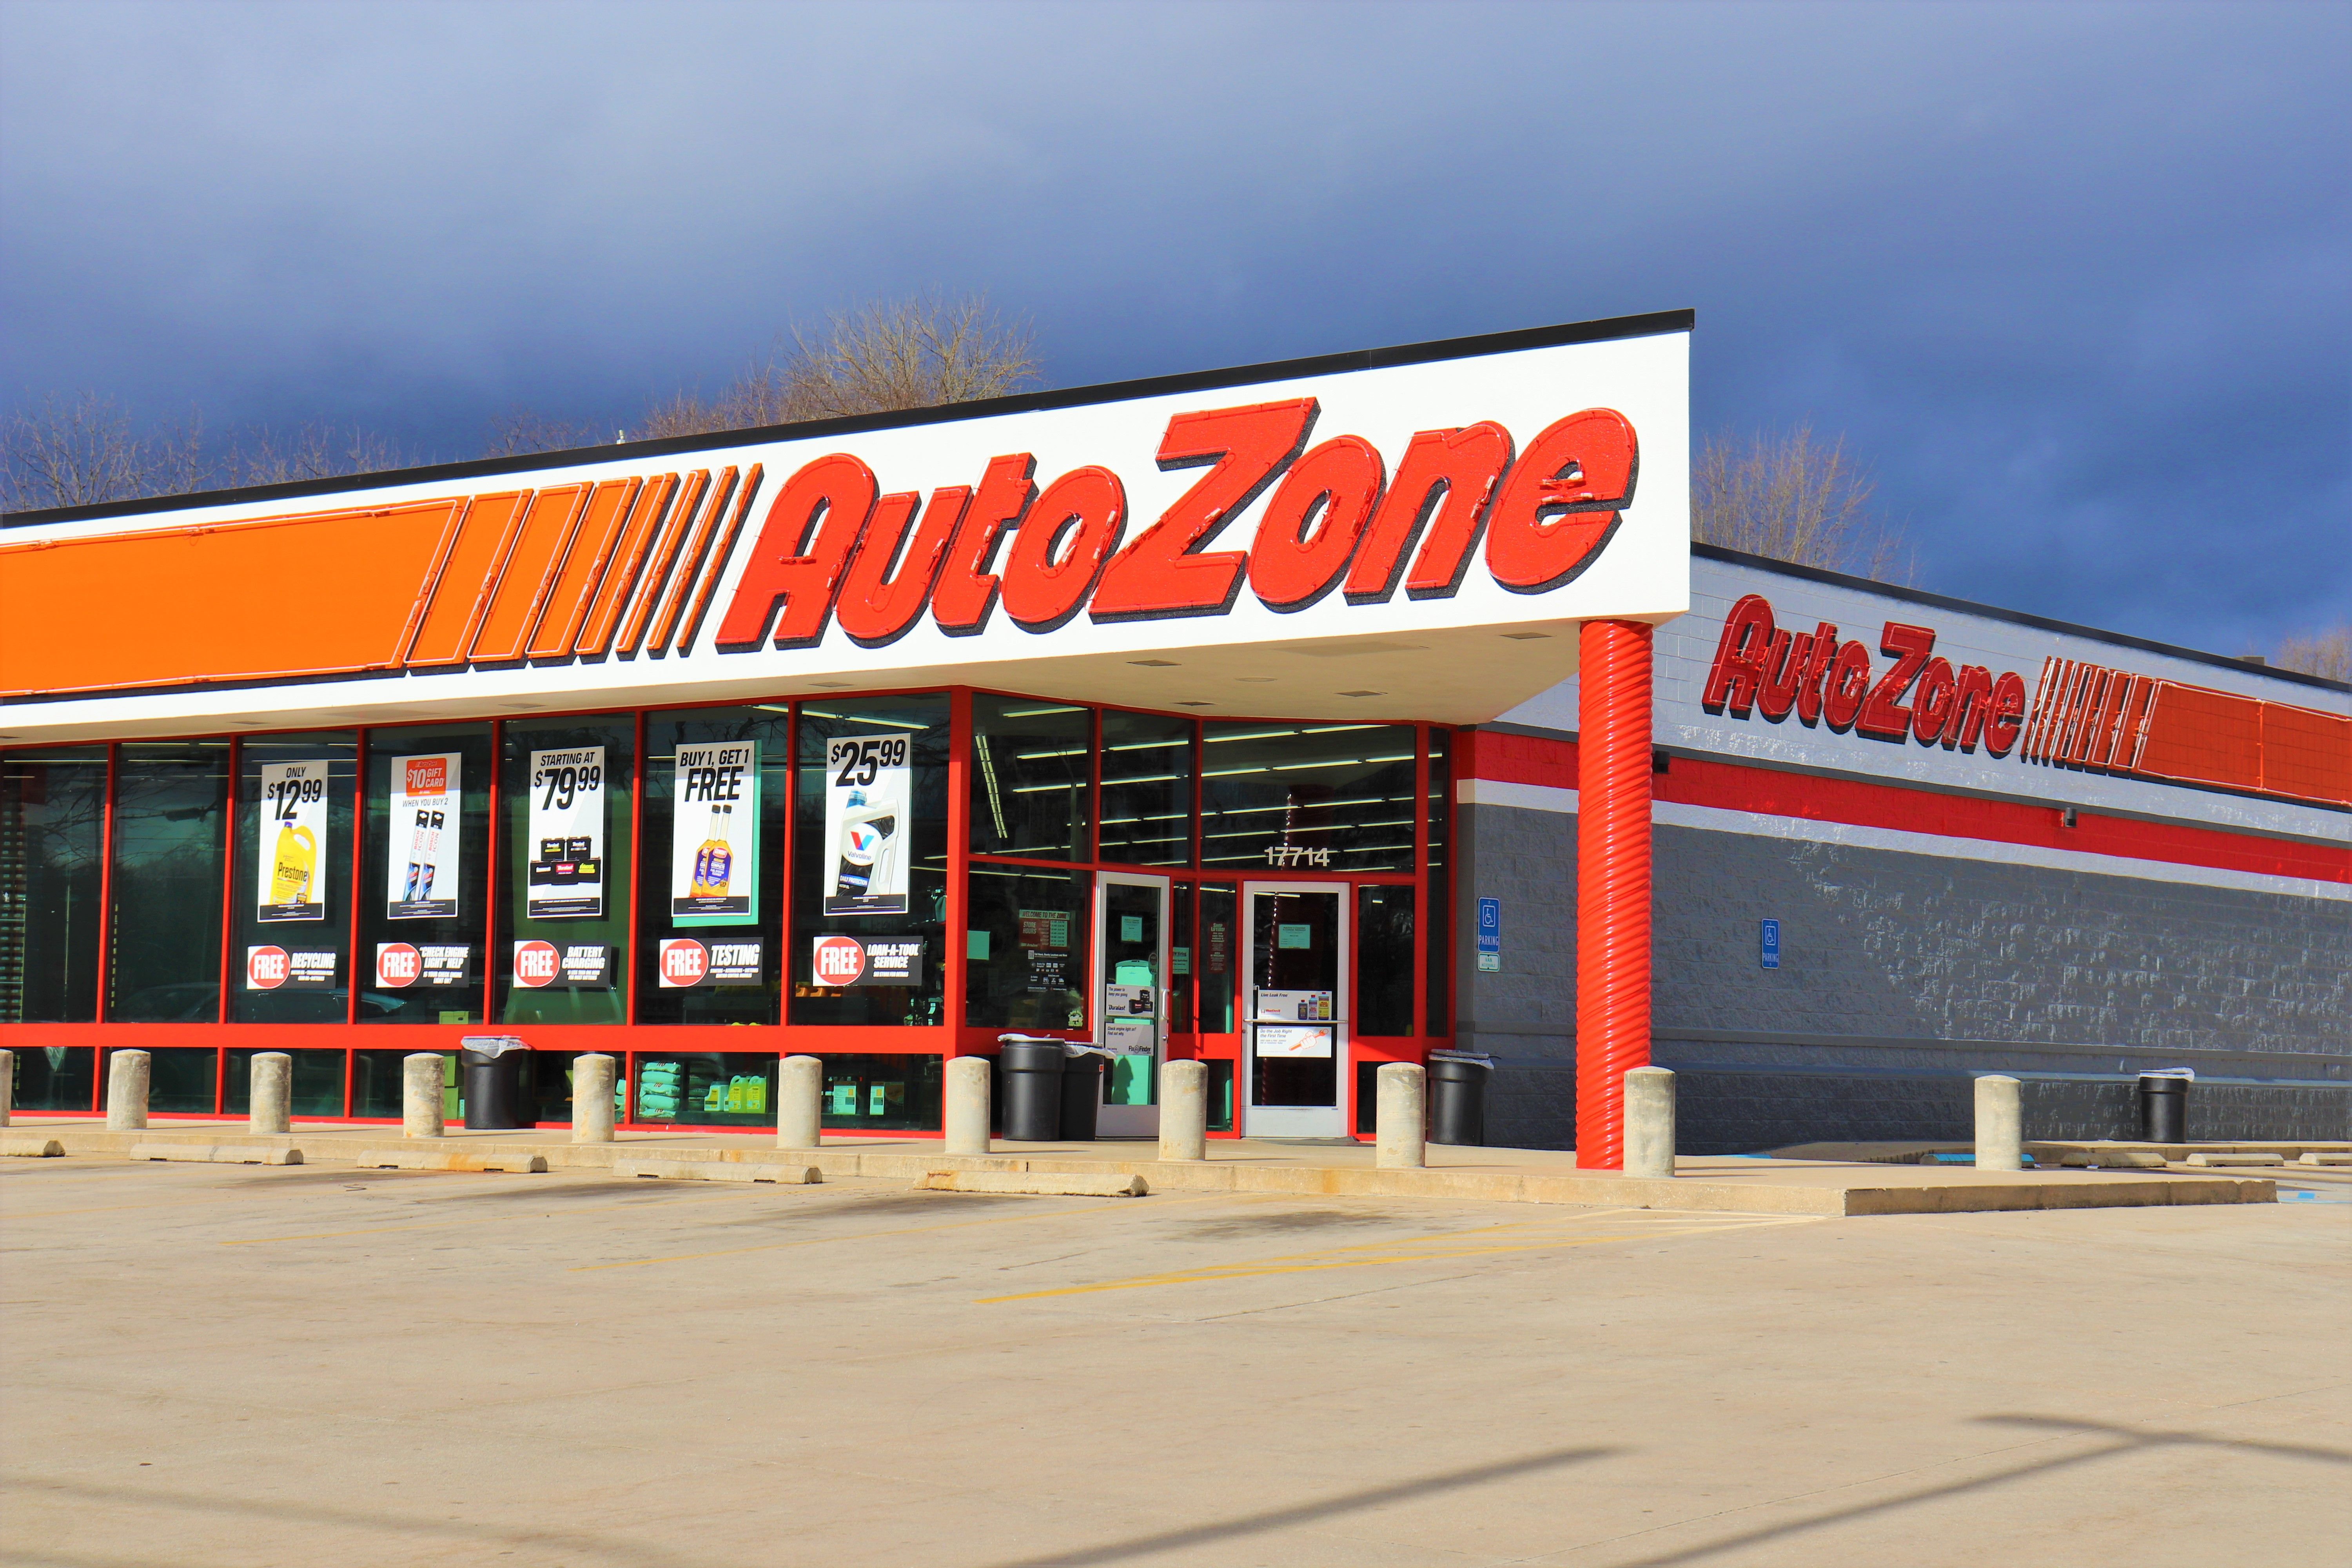 Chain.io partnered with AutoZone and Mercado to connect a legacy ERP to Mercado’s APIs and AutoZone’s freight forwarders via custom interfaces, allowing for a smooth transition without reprogramming.